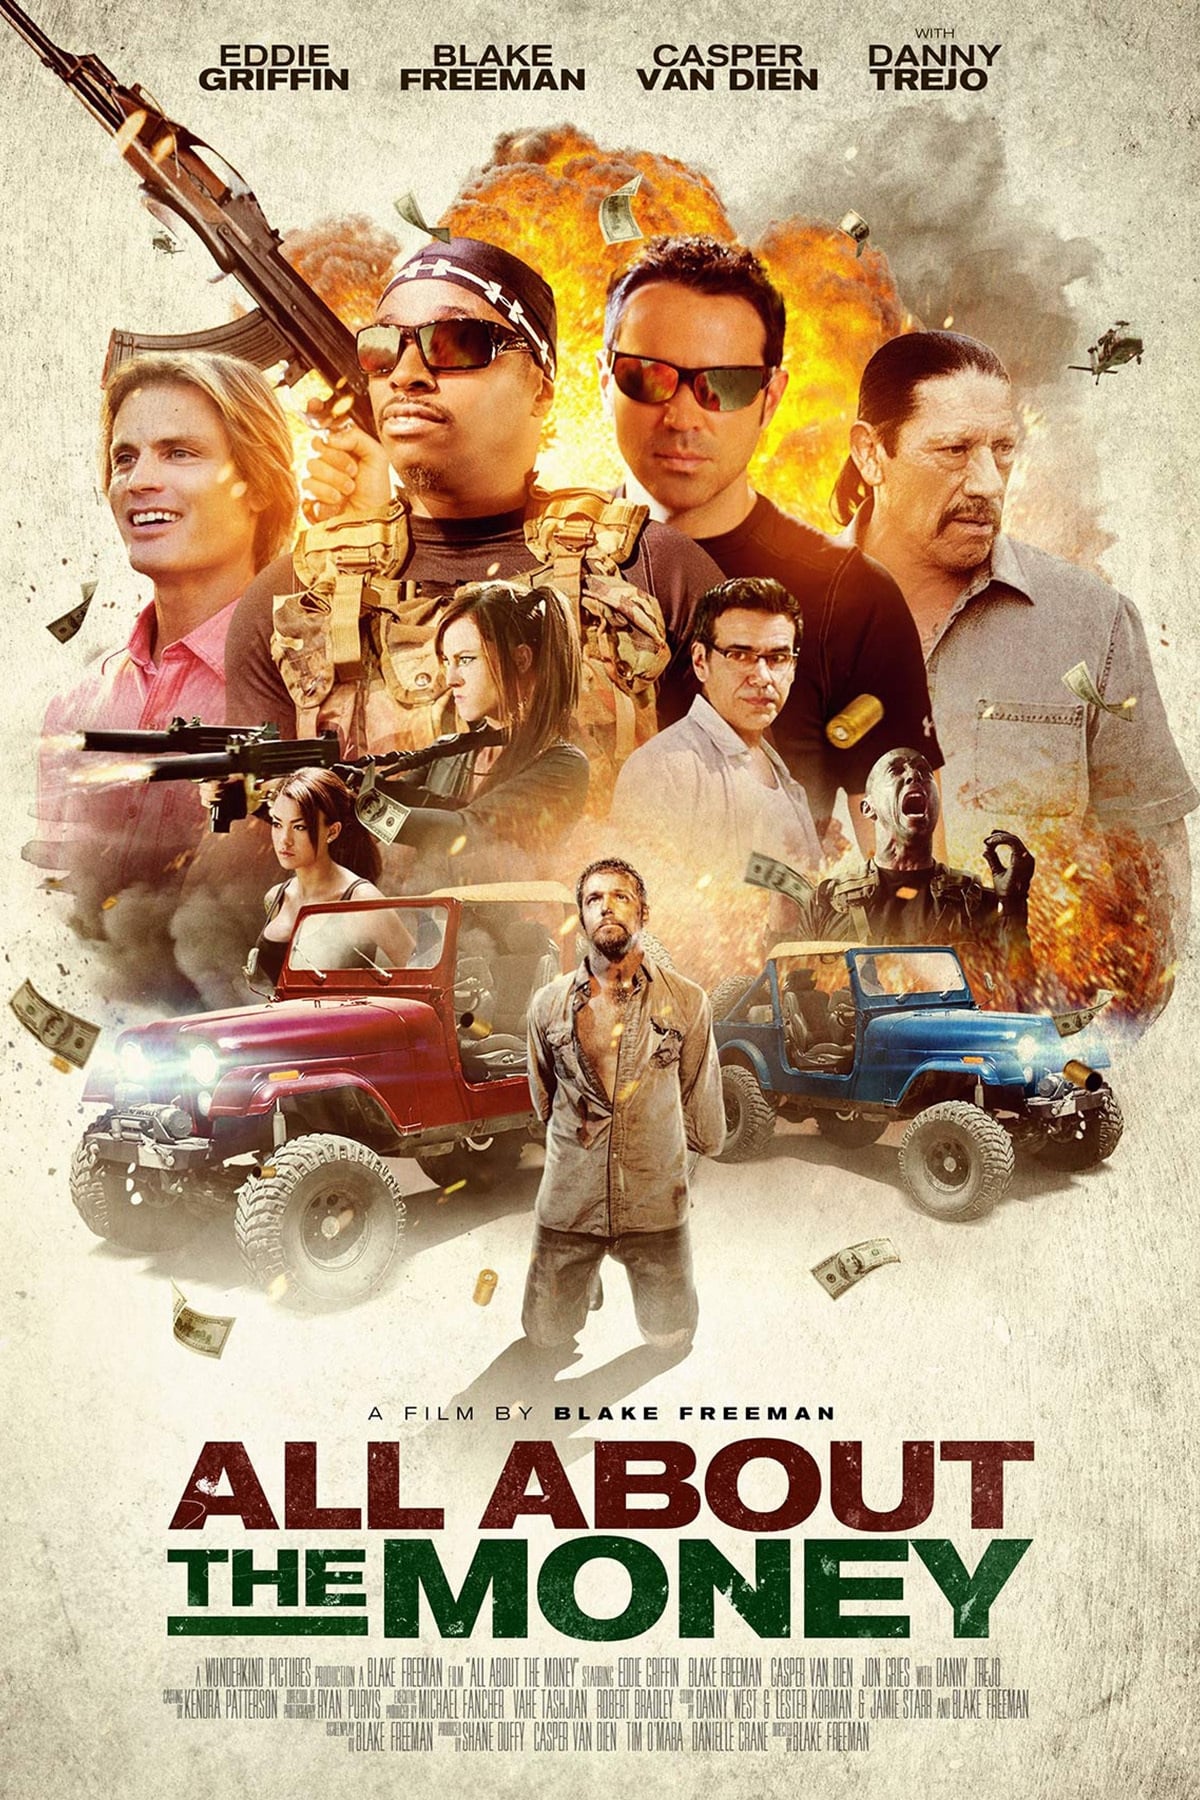 All About the Money film